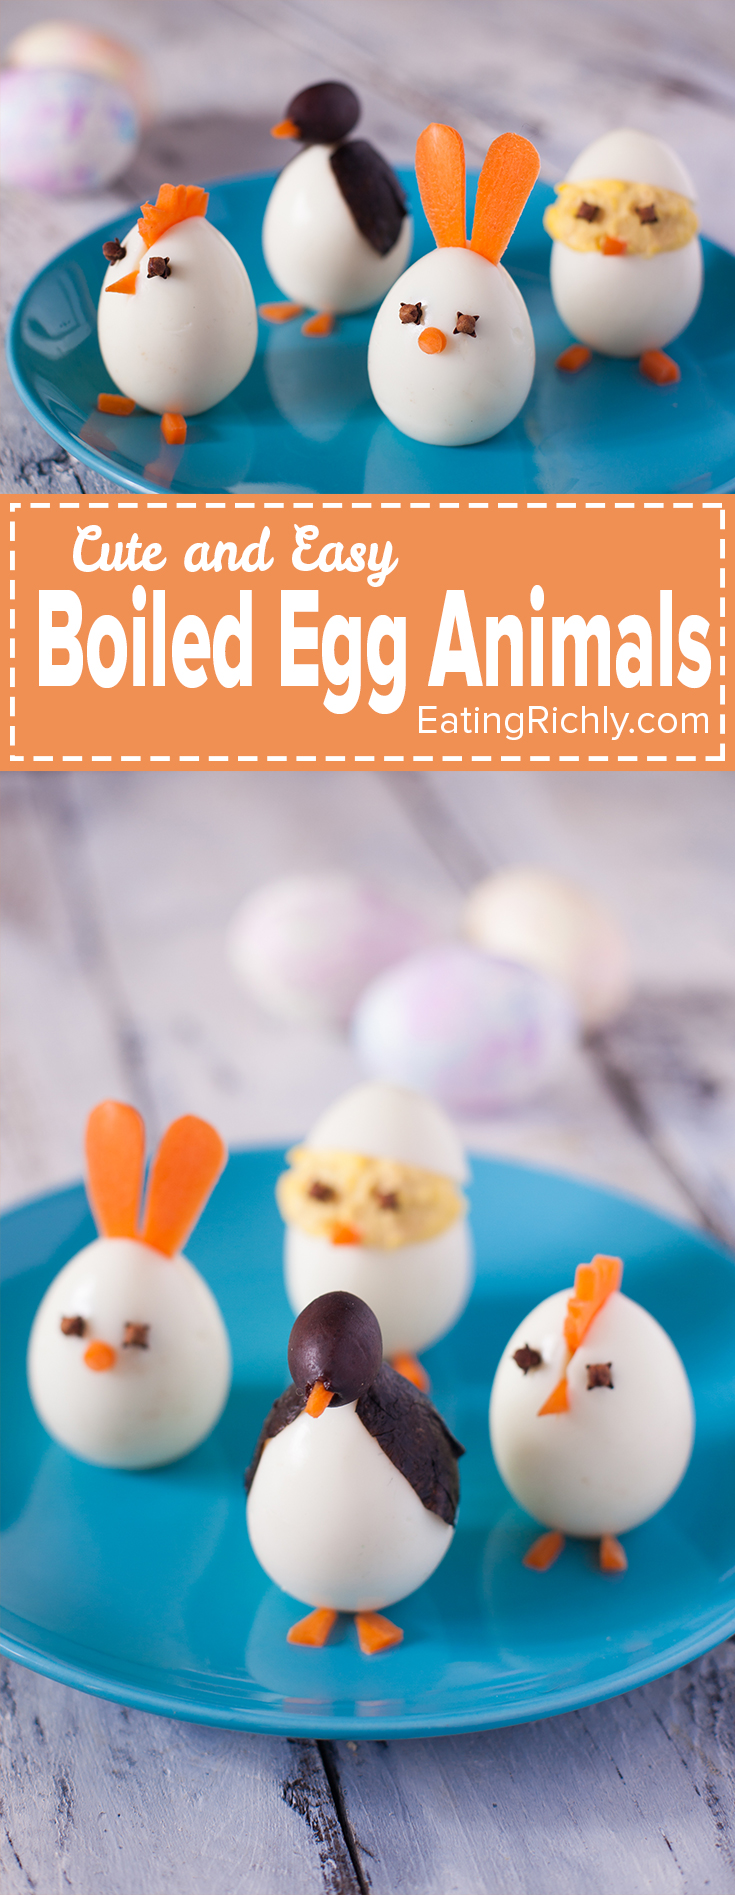 Wondering what to do with Easter eggs now that you're done with Easter? Turn them into these cute and easy boiled egg animals! Each one takes just a few minutes to make. From EatingRichly.com